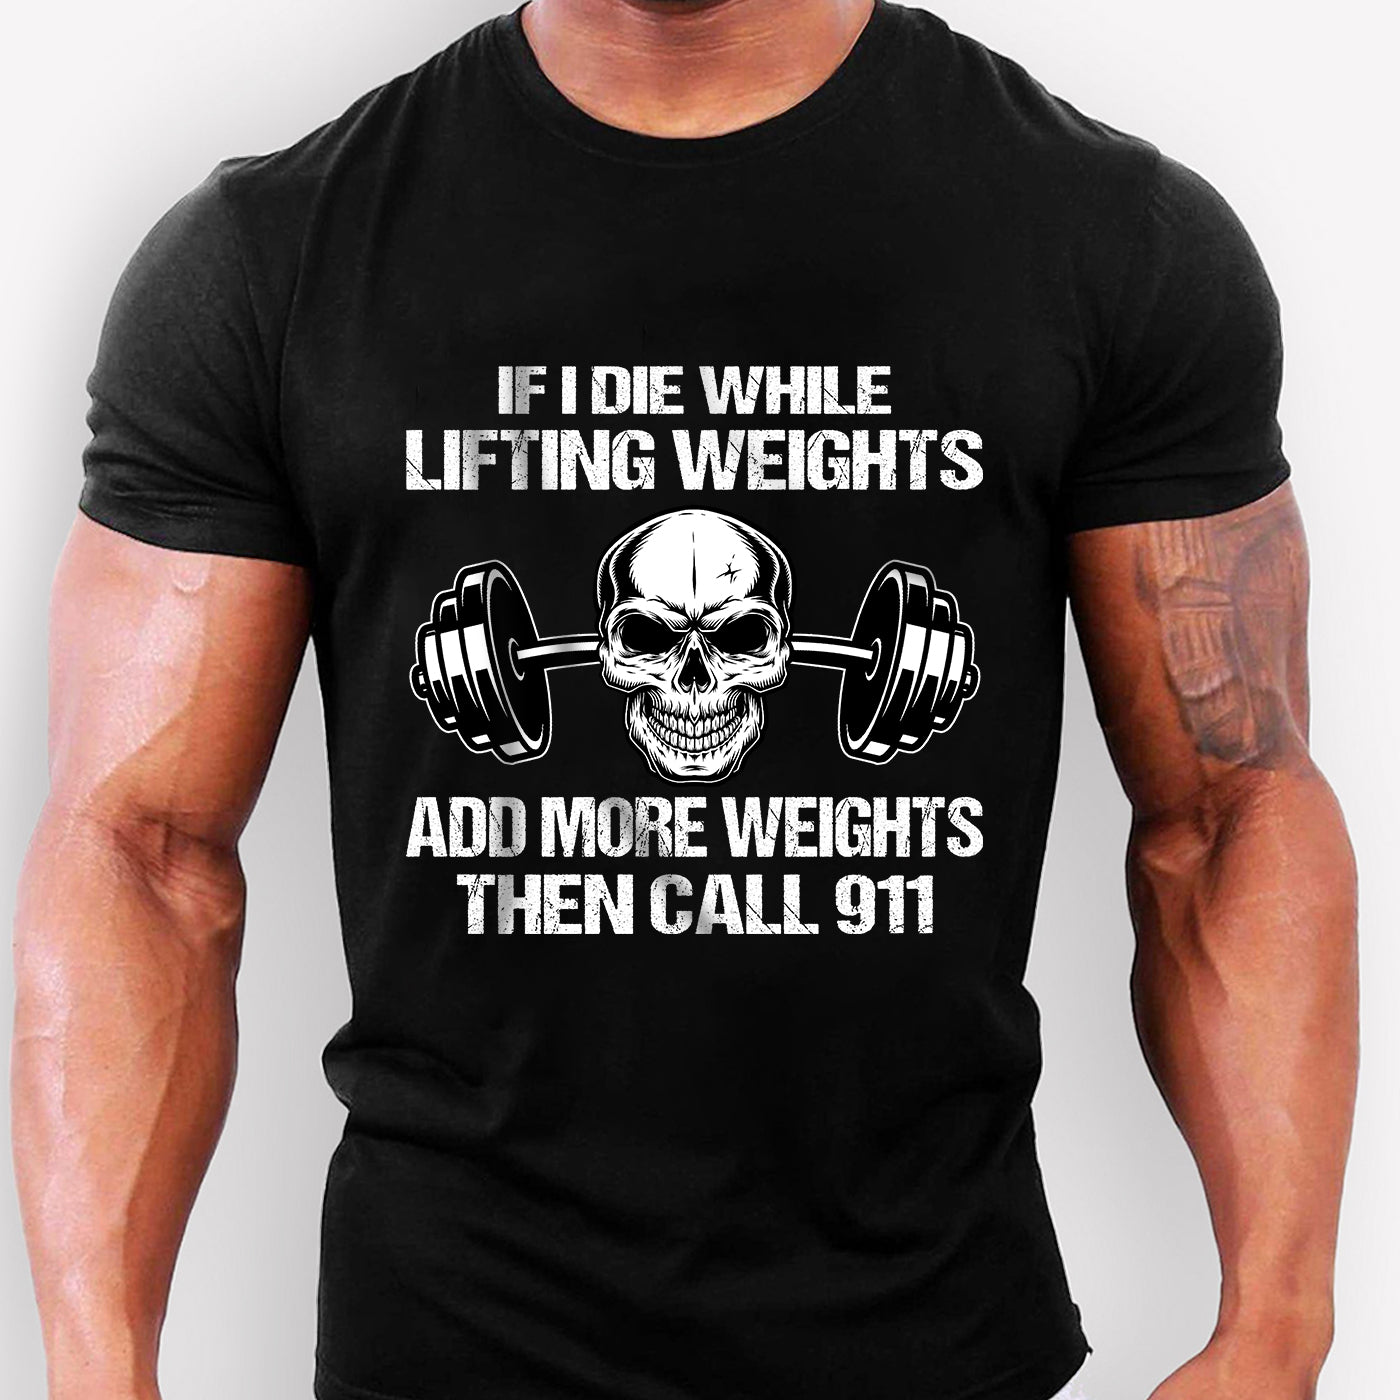 Weightlifting Workout T-Shirt: Bodybuilding Shirts With a Humorous Twist 11096